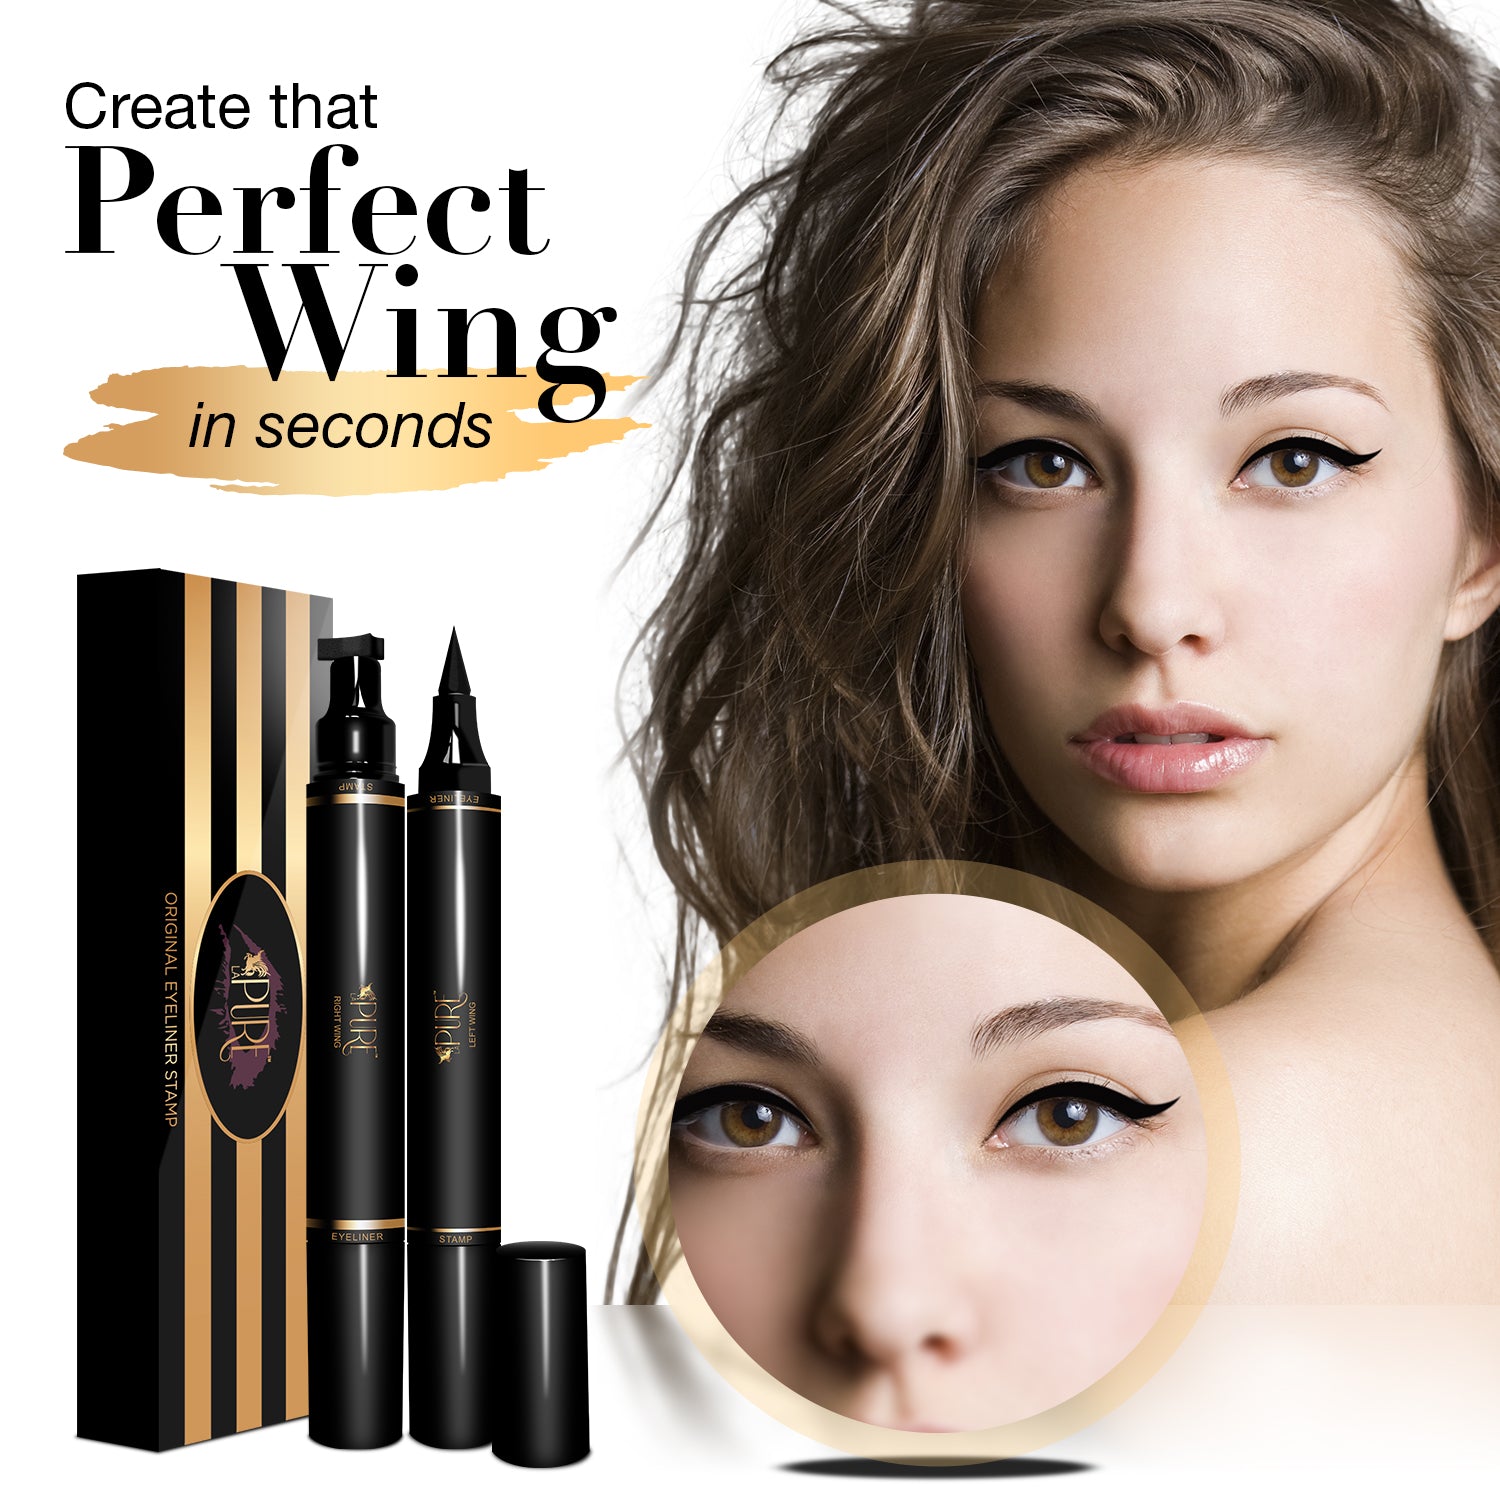 Create that perfect wing in seconds